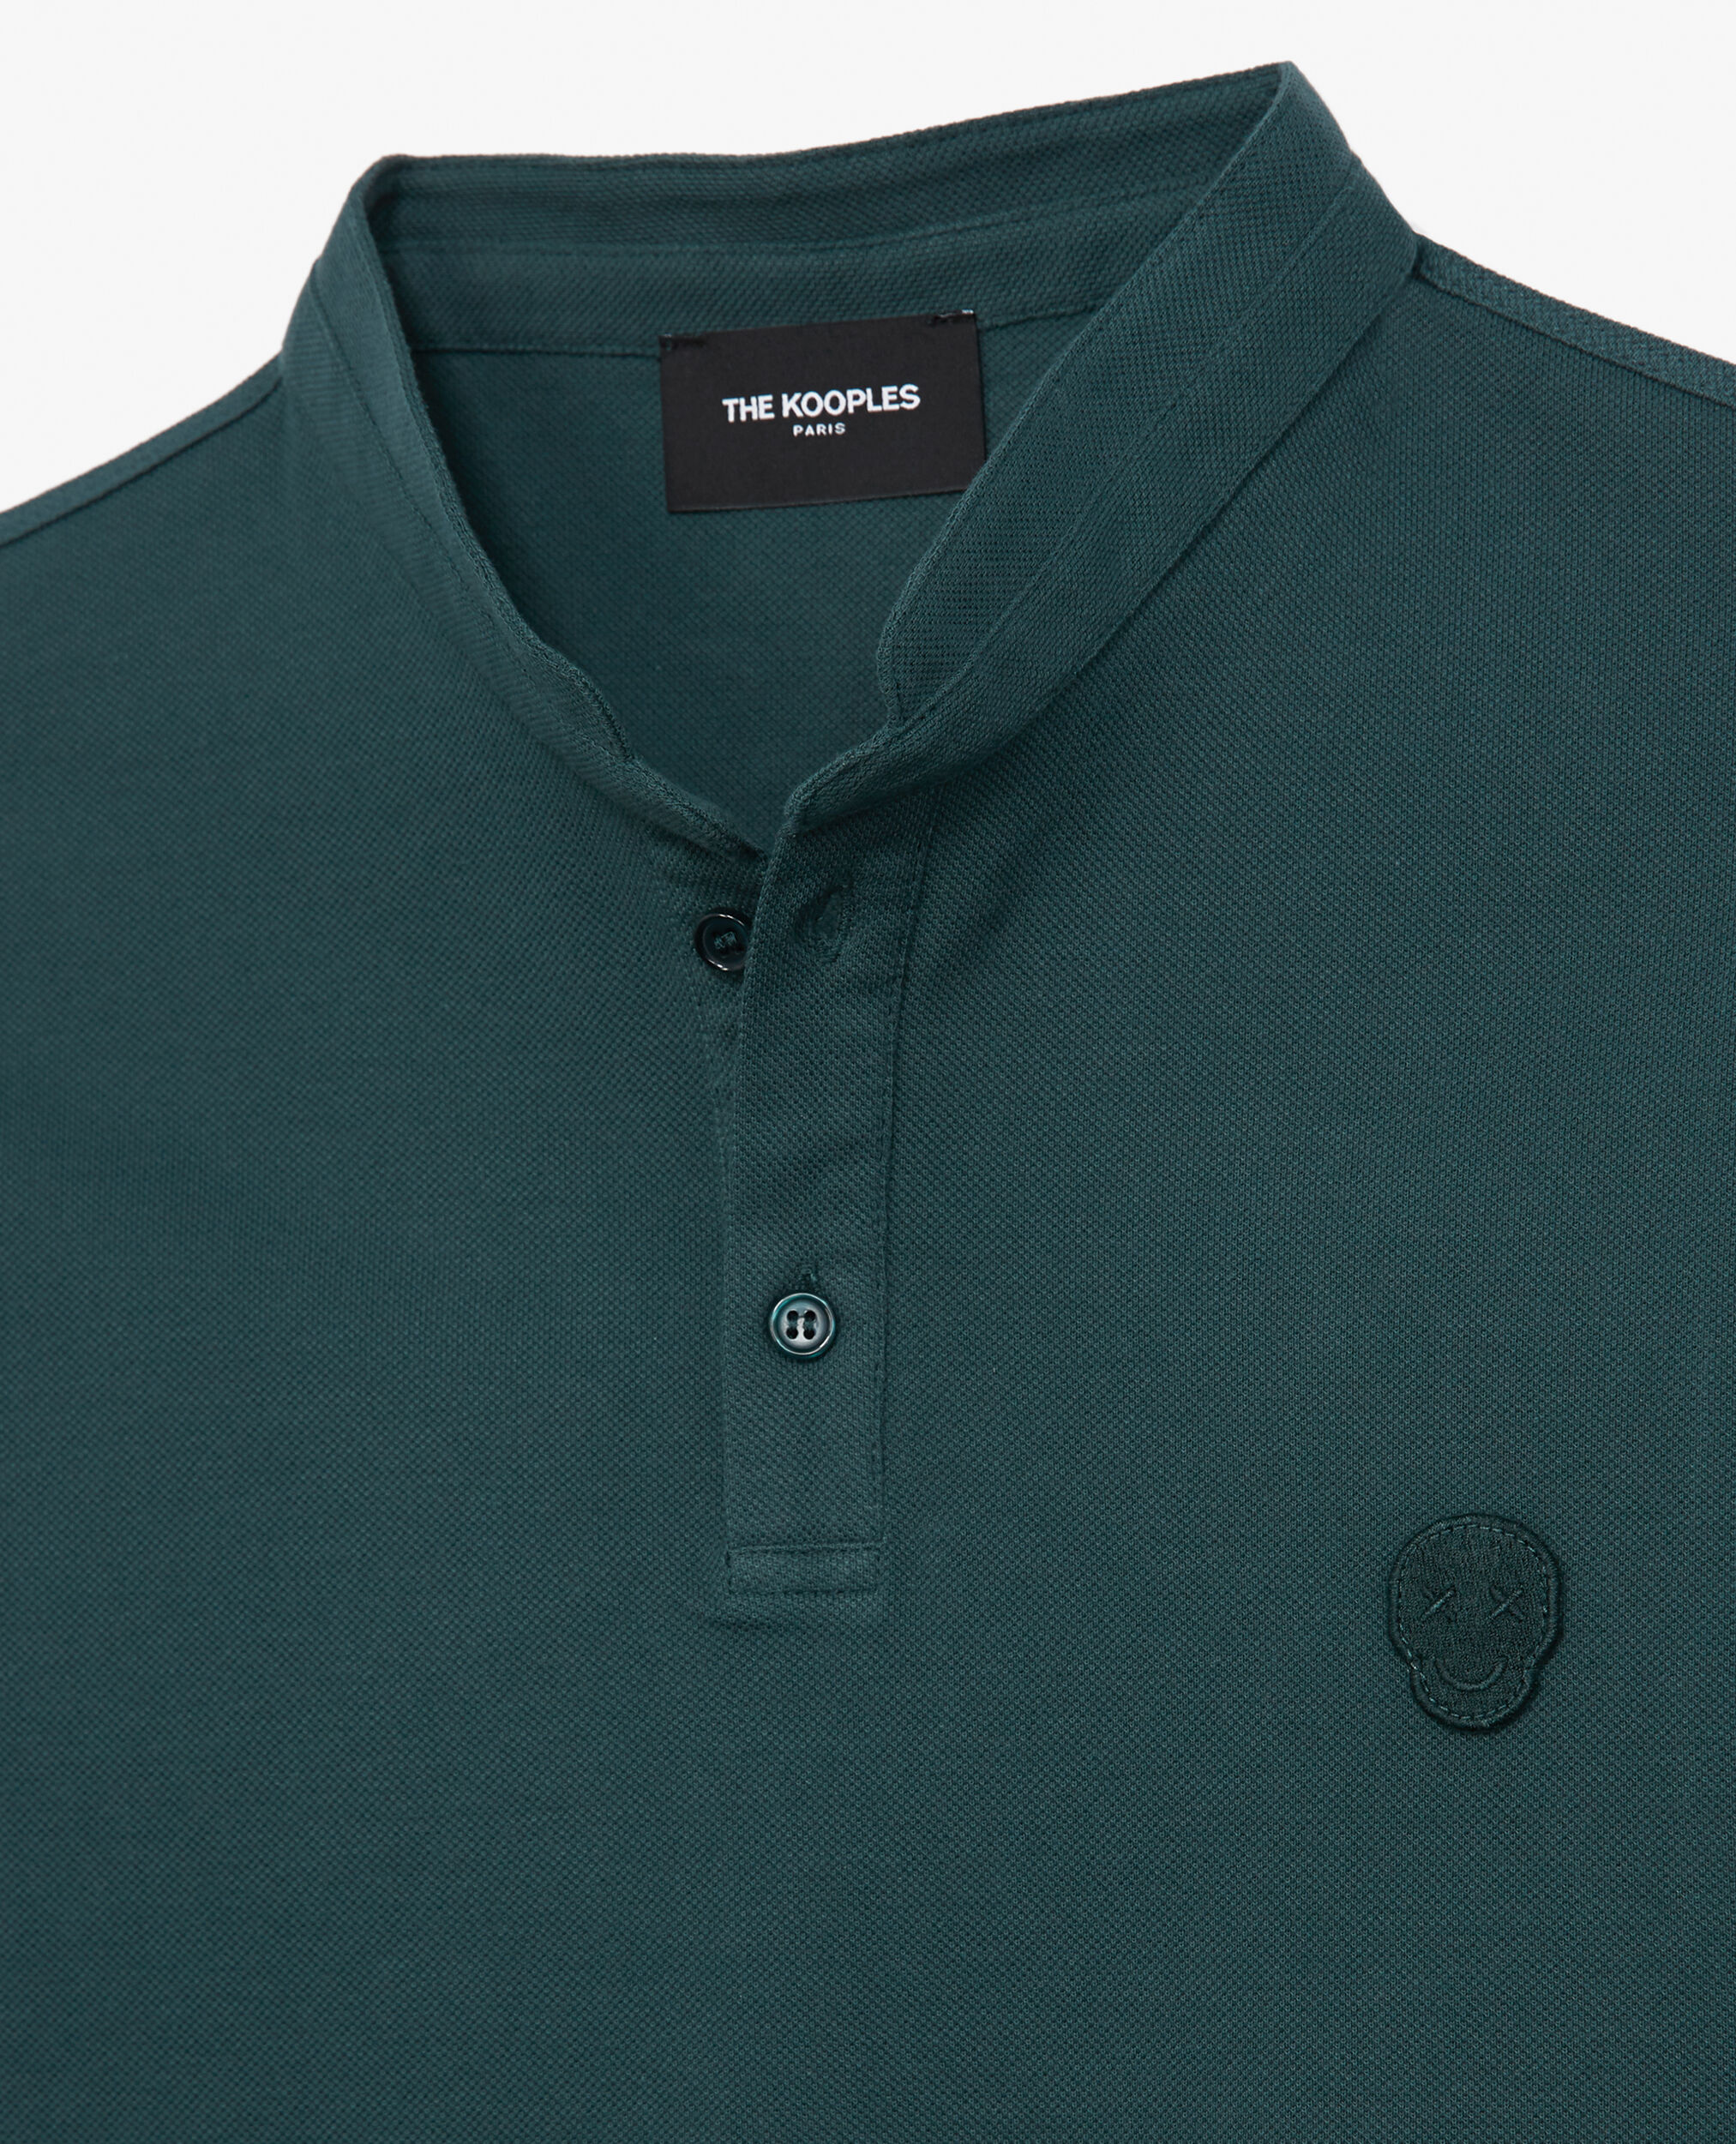 Dark green cotton polo w/officer collar/badge, DARK GREEN, hi-res image number null